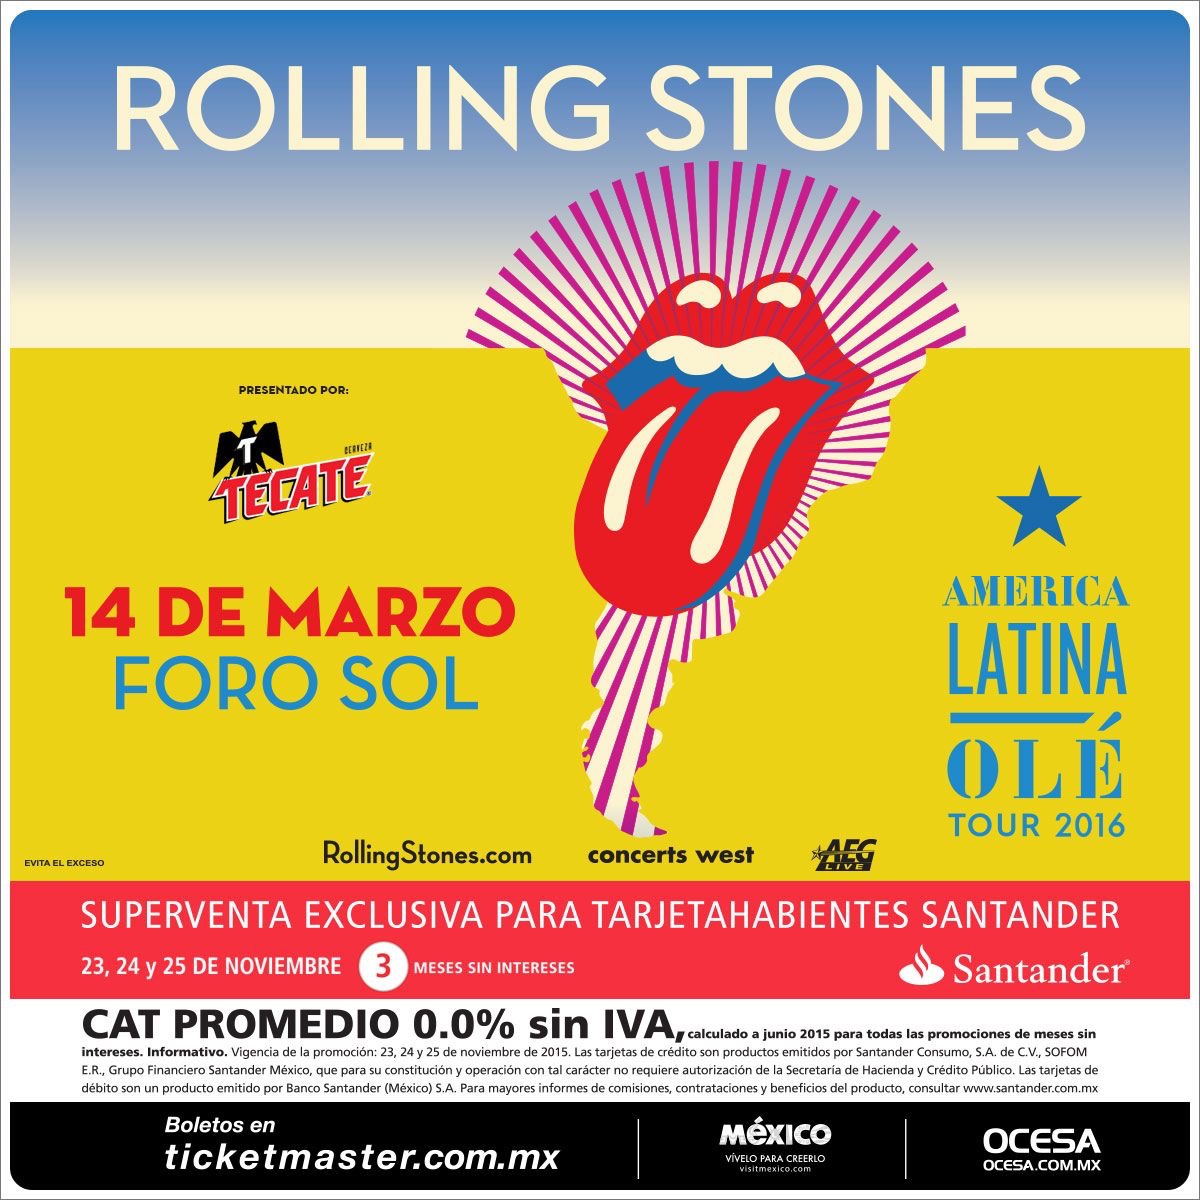 The_Rolling_Stones_Mexico_2016